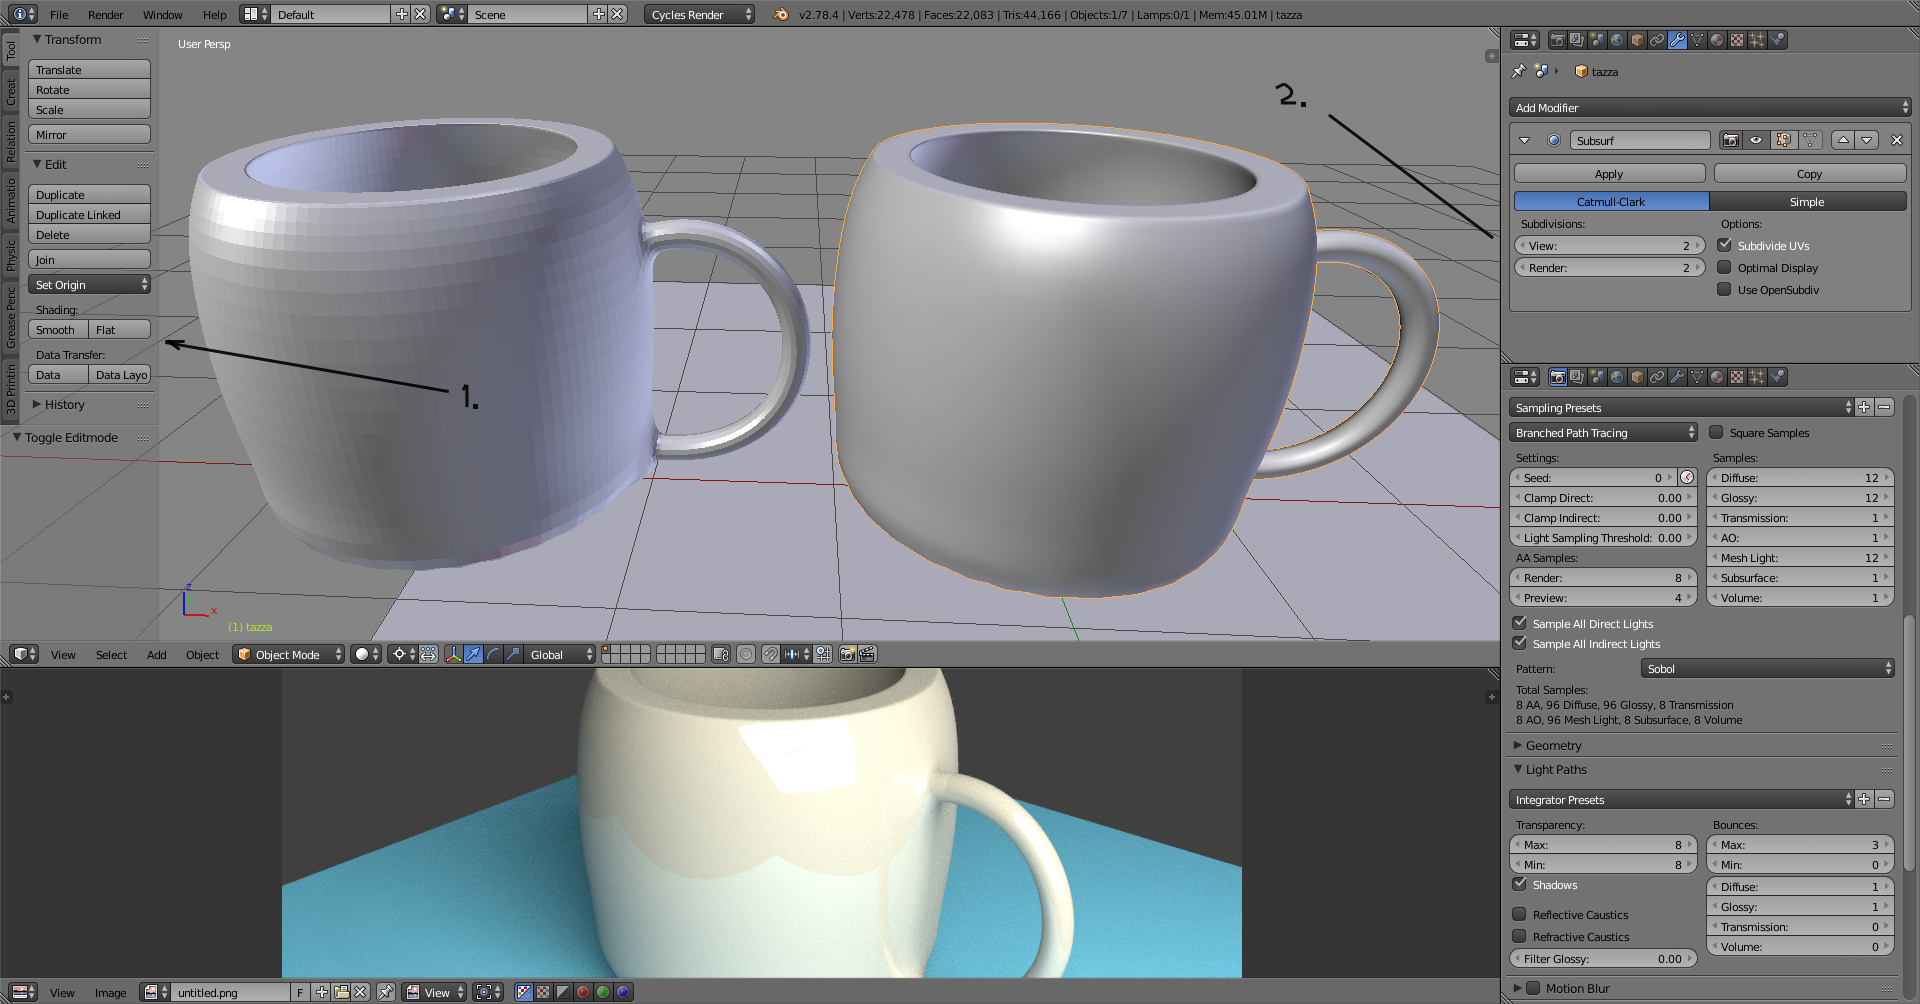 lesterbanks on X: How to Shatter a Mug in Blender With Rigid Body